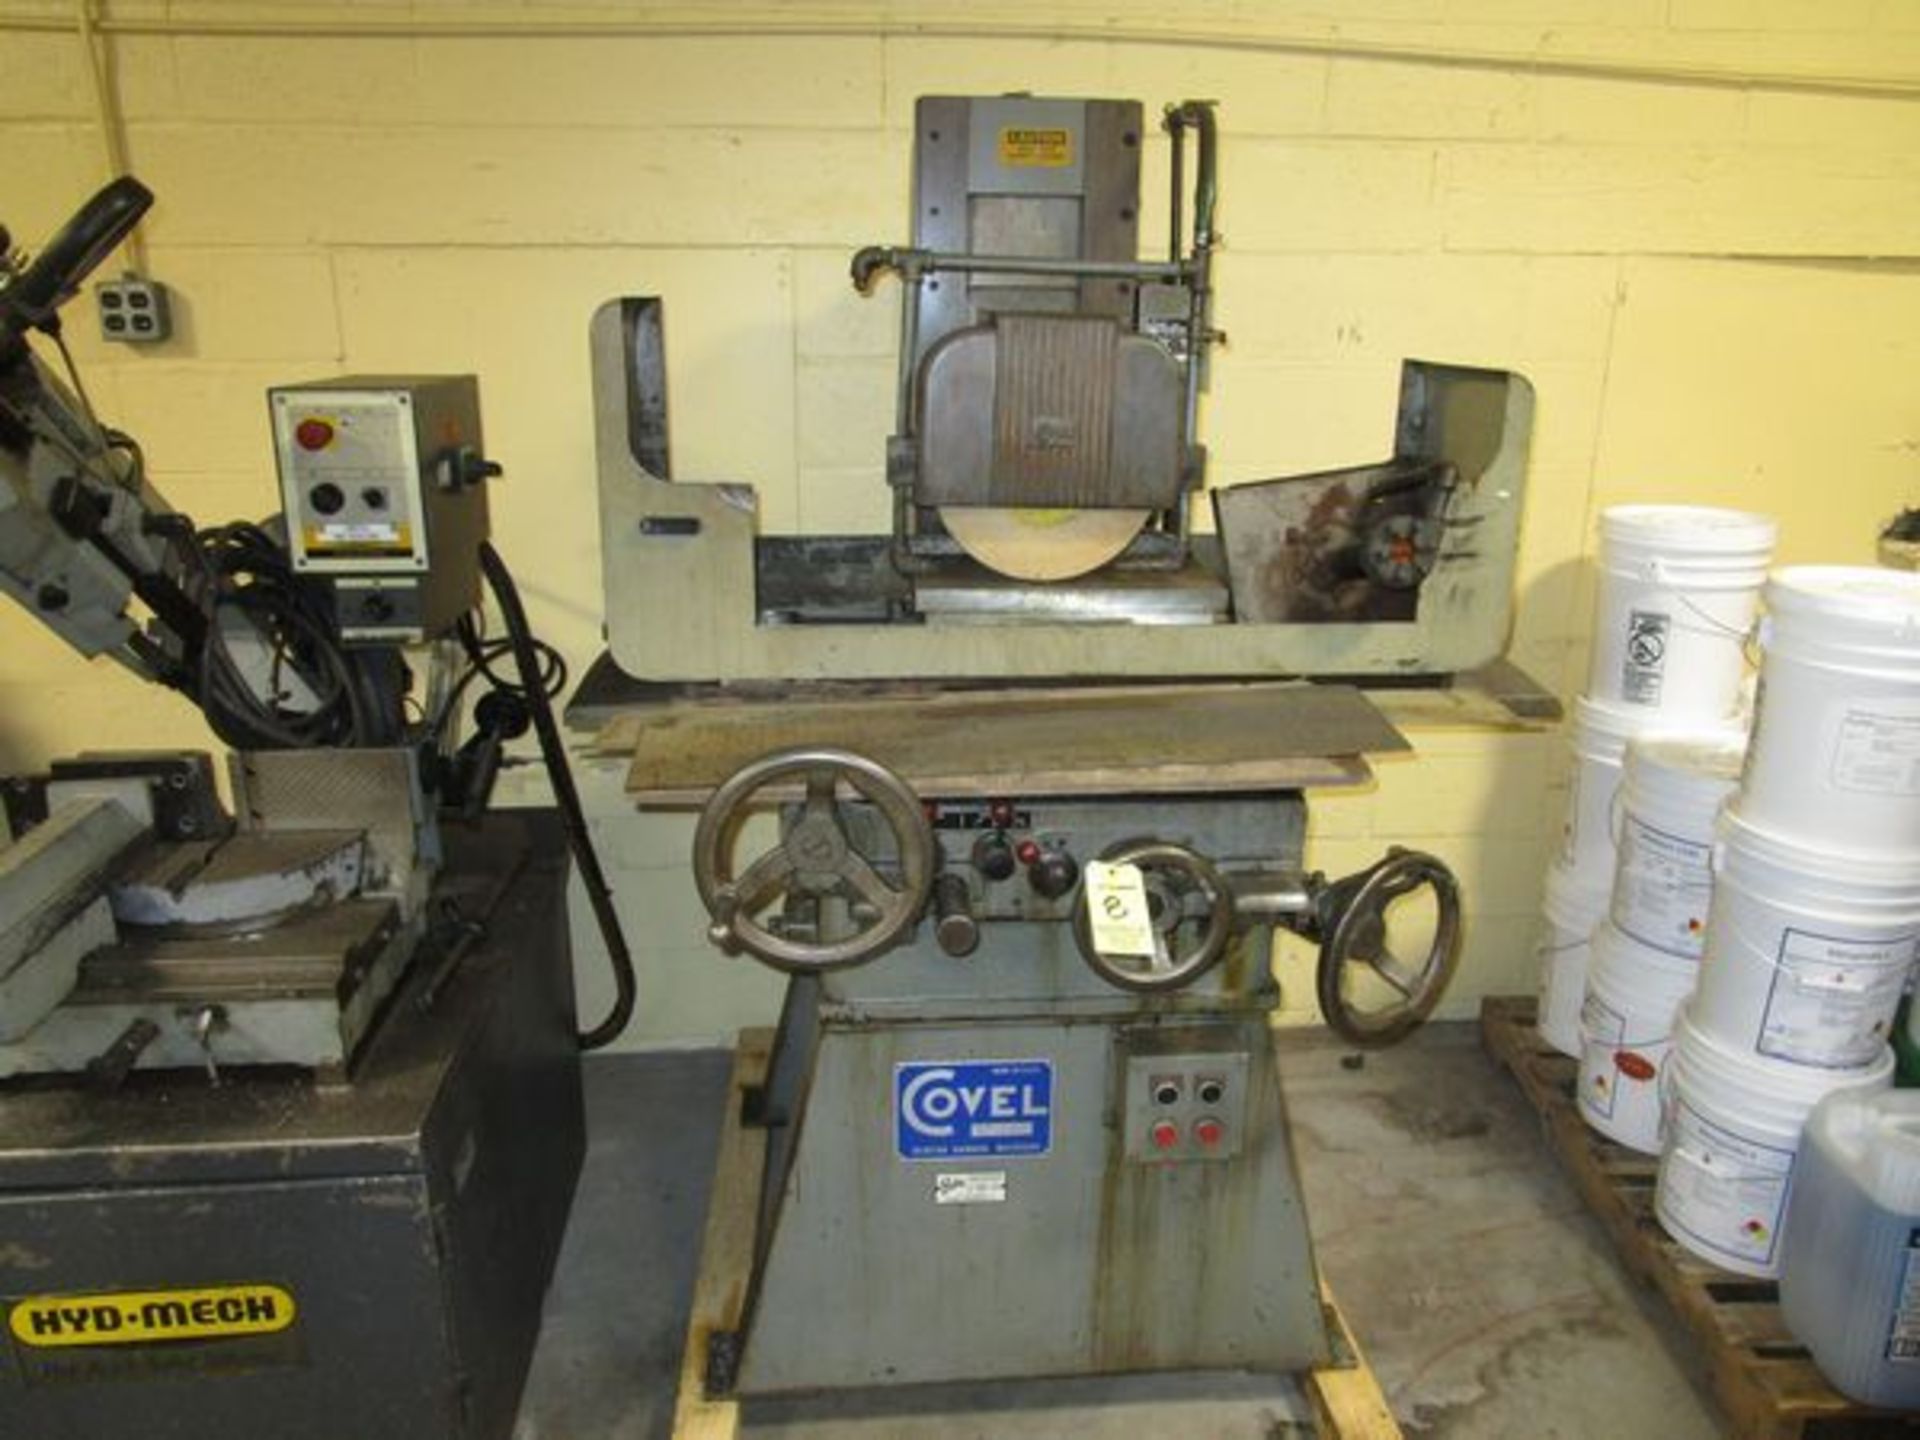 Covel Mod. 17H Surface Grinder, s/n 17H-5531, 10" x 17" Mag Chuck w/Electro-Matic Magnetic Chuck